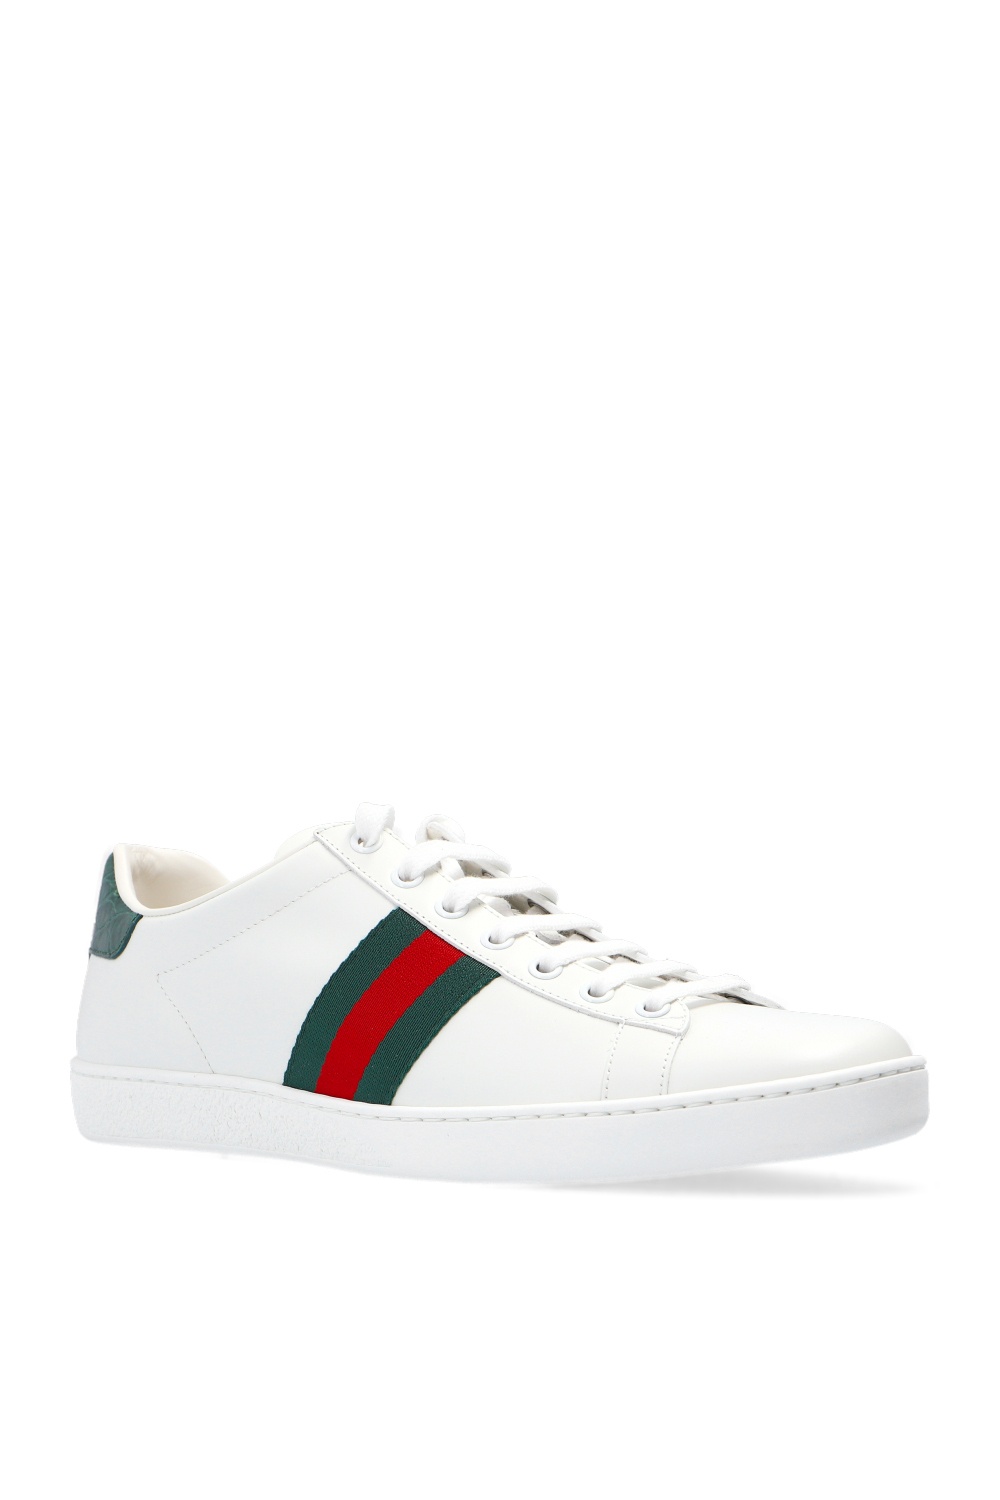 Gucci Web' striped 'ACE' sports Boost shoes